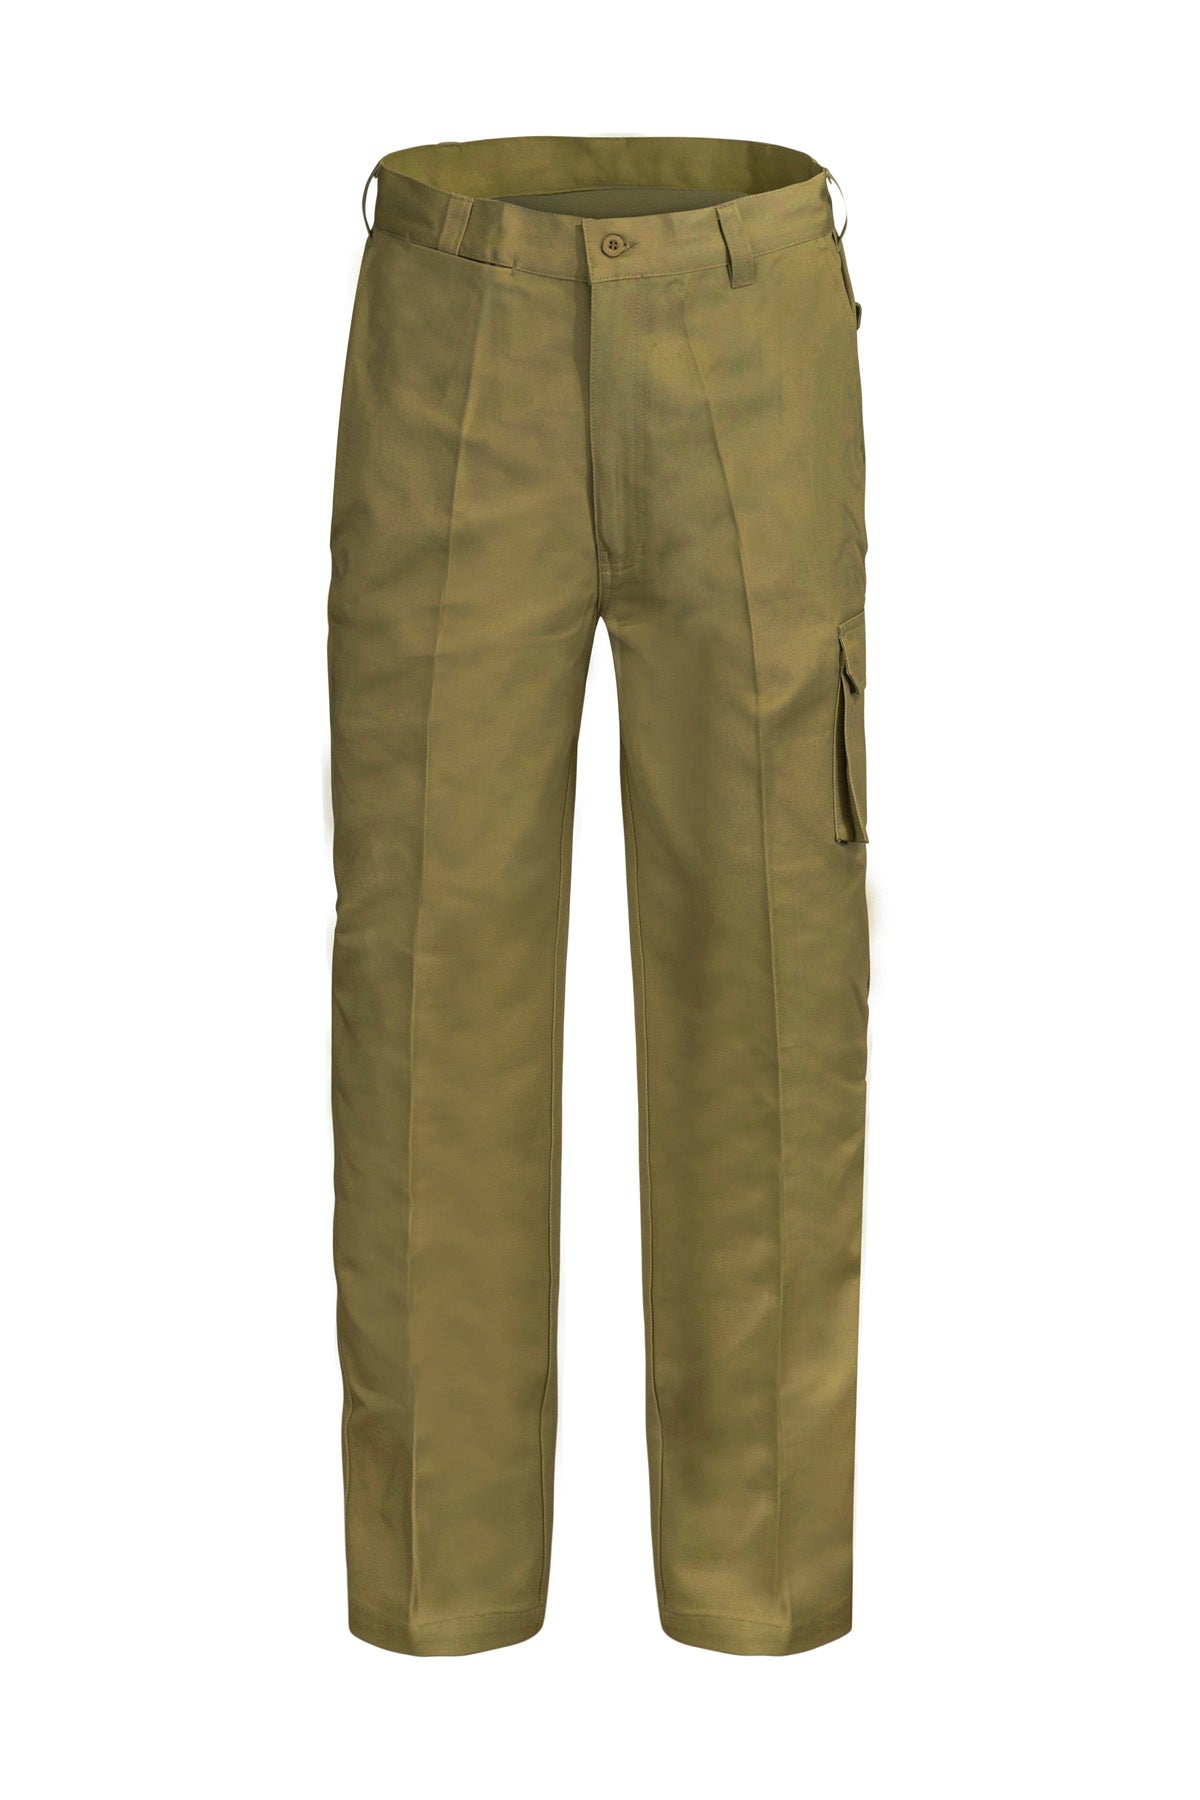 Cargo Cotton Drill Trouser - made by Workcraft